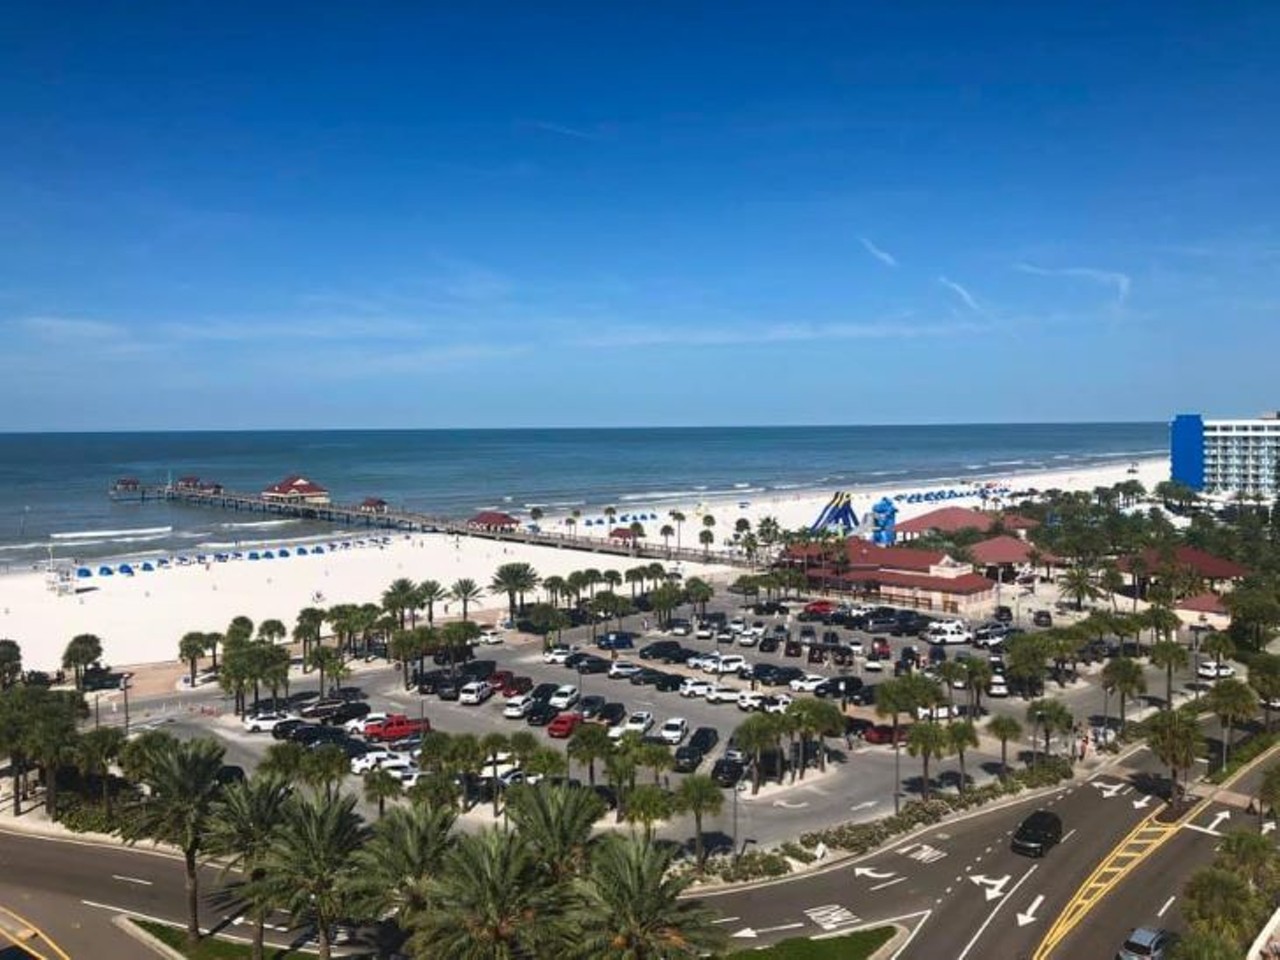 Clearwater Beach 
4 hours away
Rated Trip Advisor&#146;s No. 1 beach in 2018, this small beach town is known for its pristine beaches and delicious restaurants. 
Photo via City of Clearwater Government/Facebook